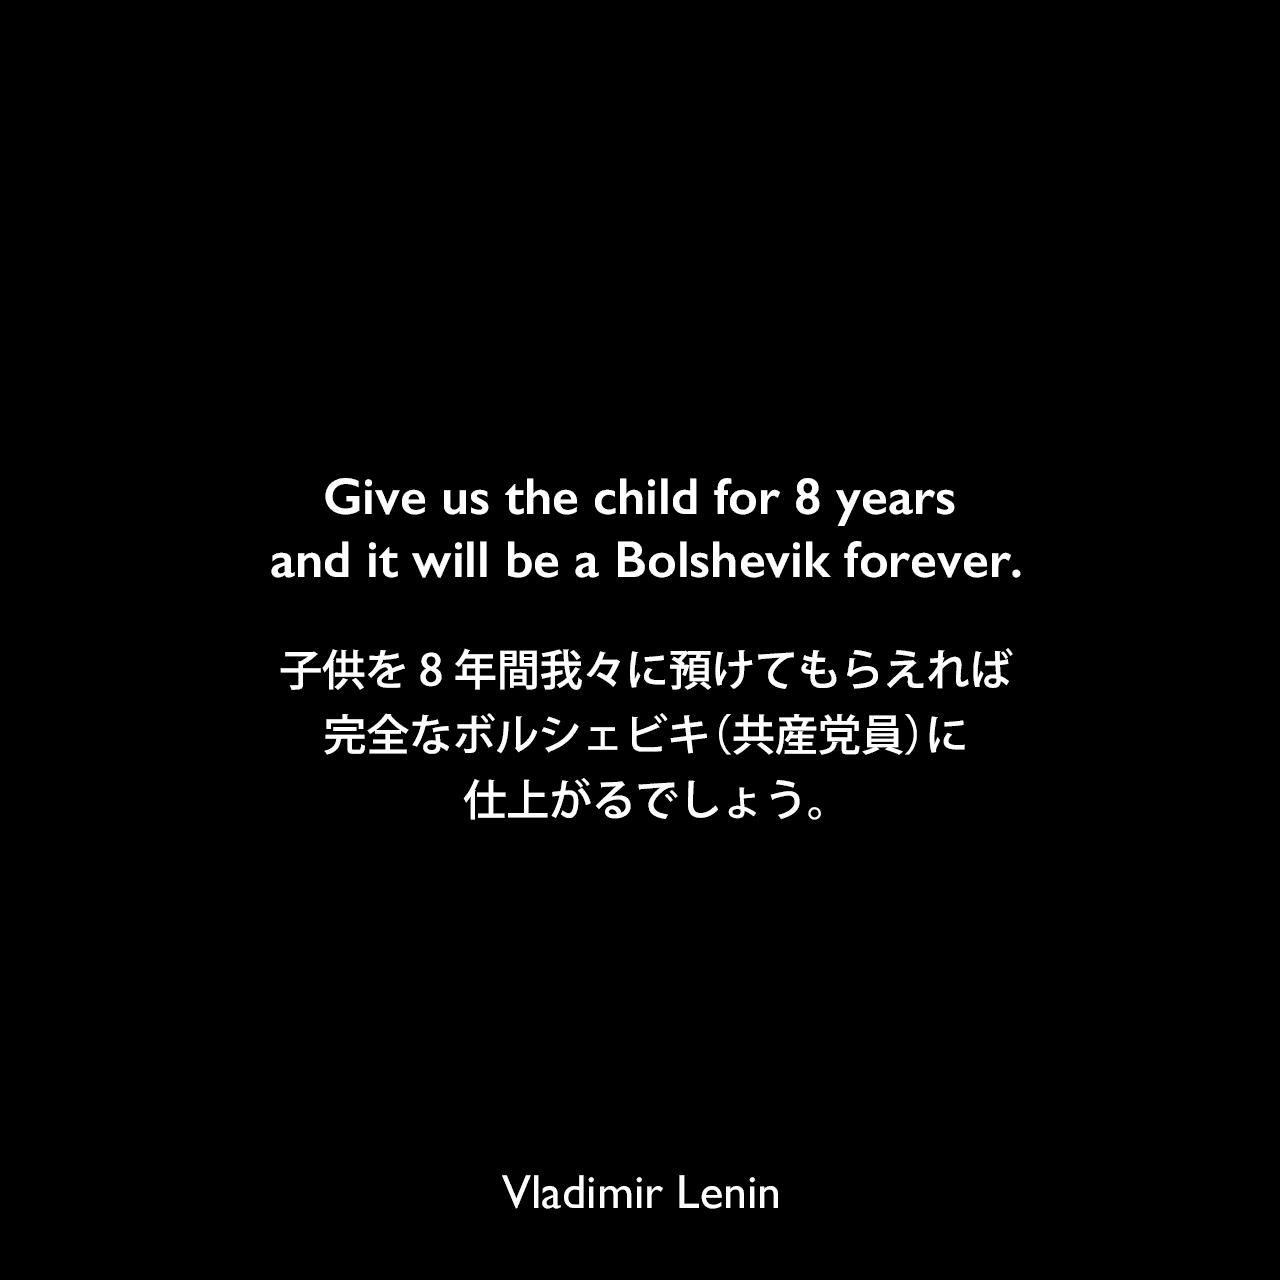 Give us the child for 8 years and it will be a Bolshevik forever.子供を8年間我々に預けてもらえれば、完全なボルシェビキ（共産党員）に仕上がるでしょう。Vladimir Lenin